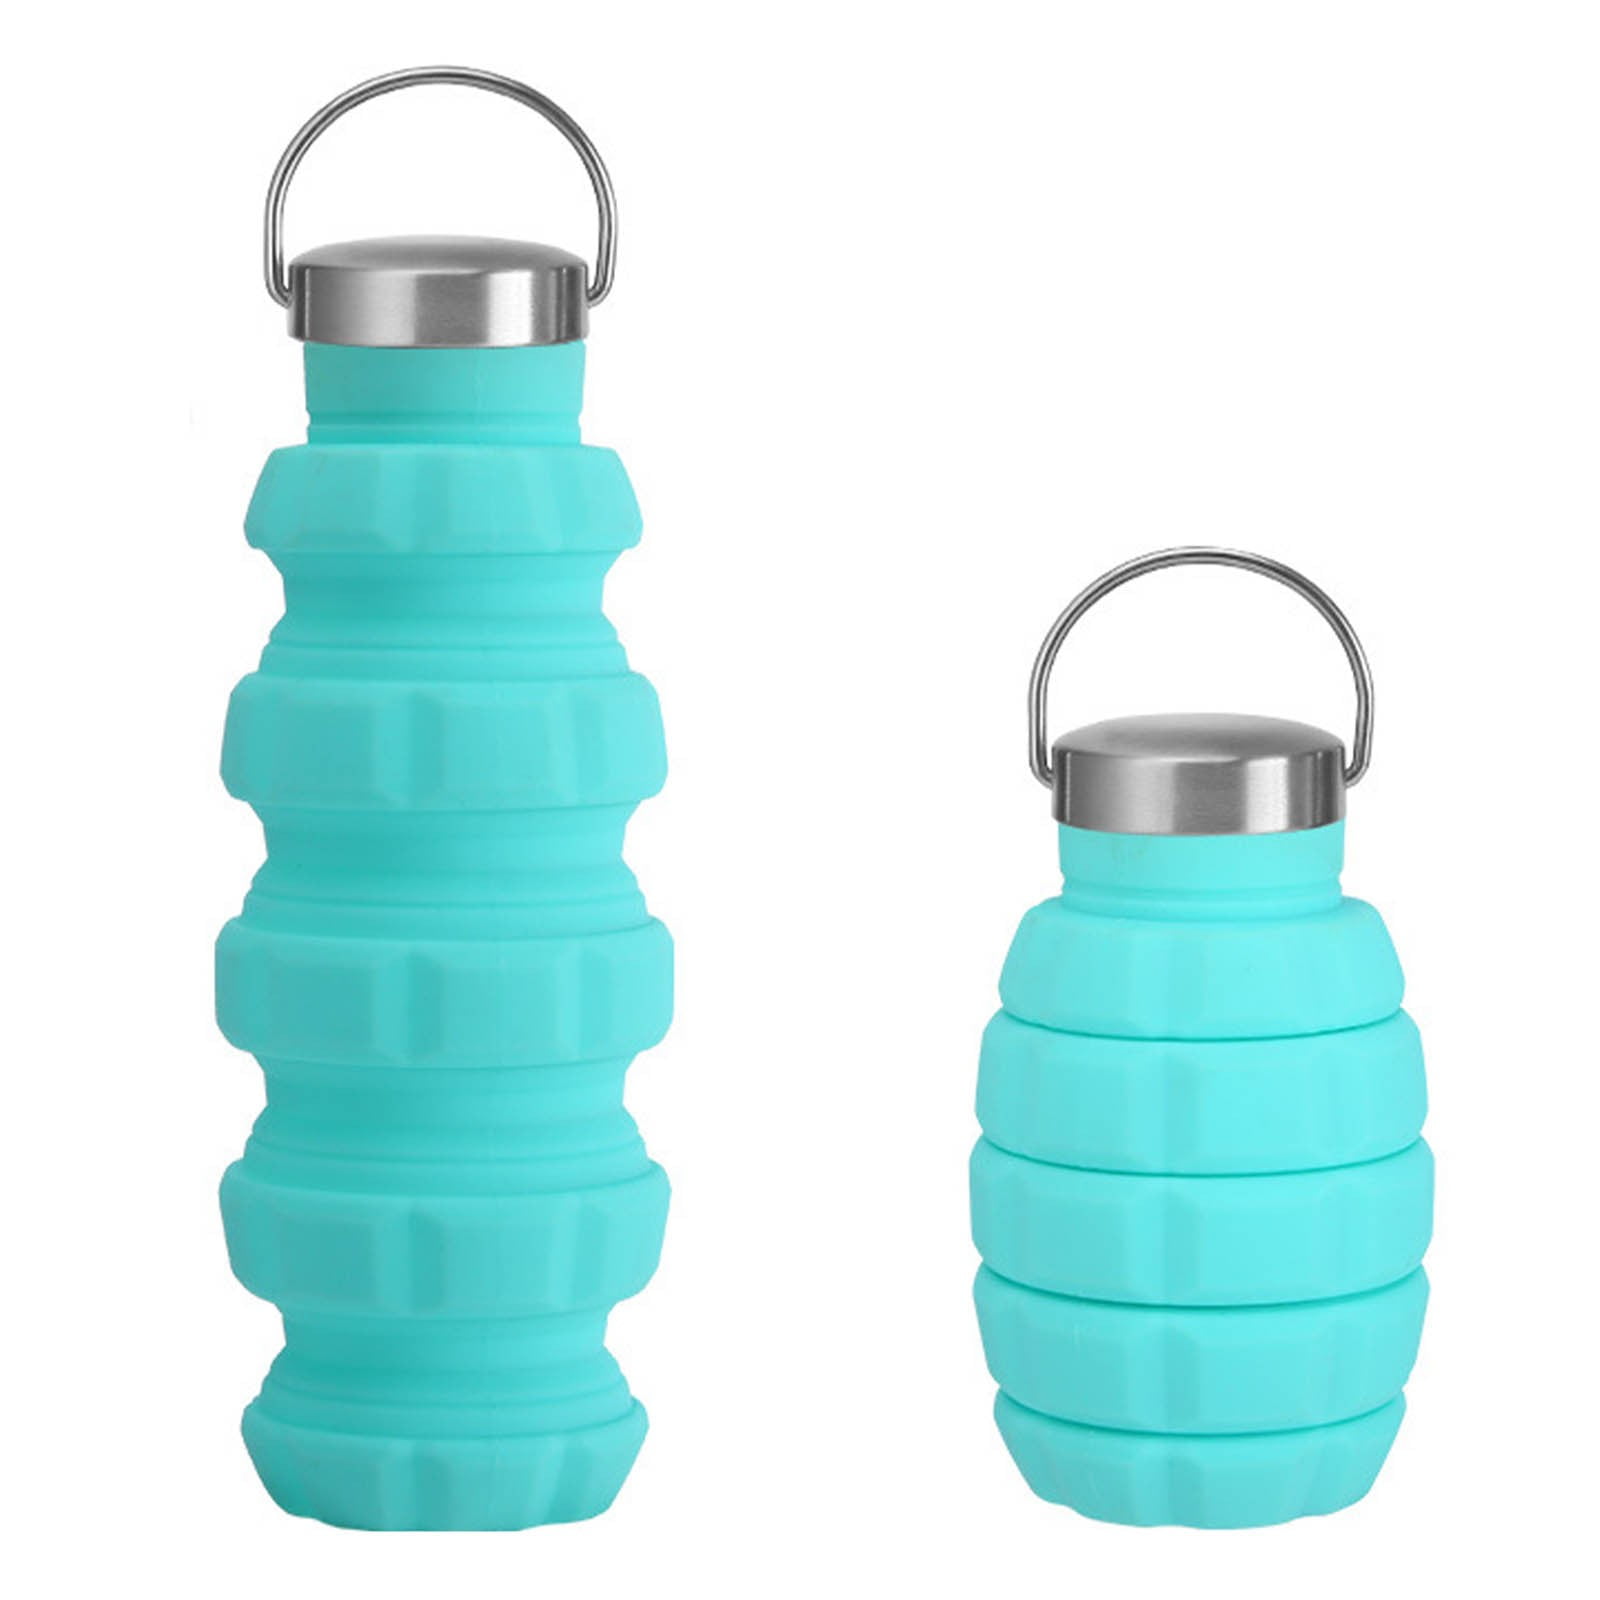 Herrnalise Collapsible Water Bottles 16oz/500ml, Silicone Travel